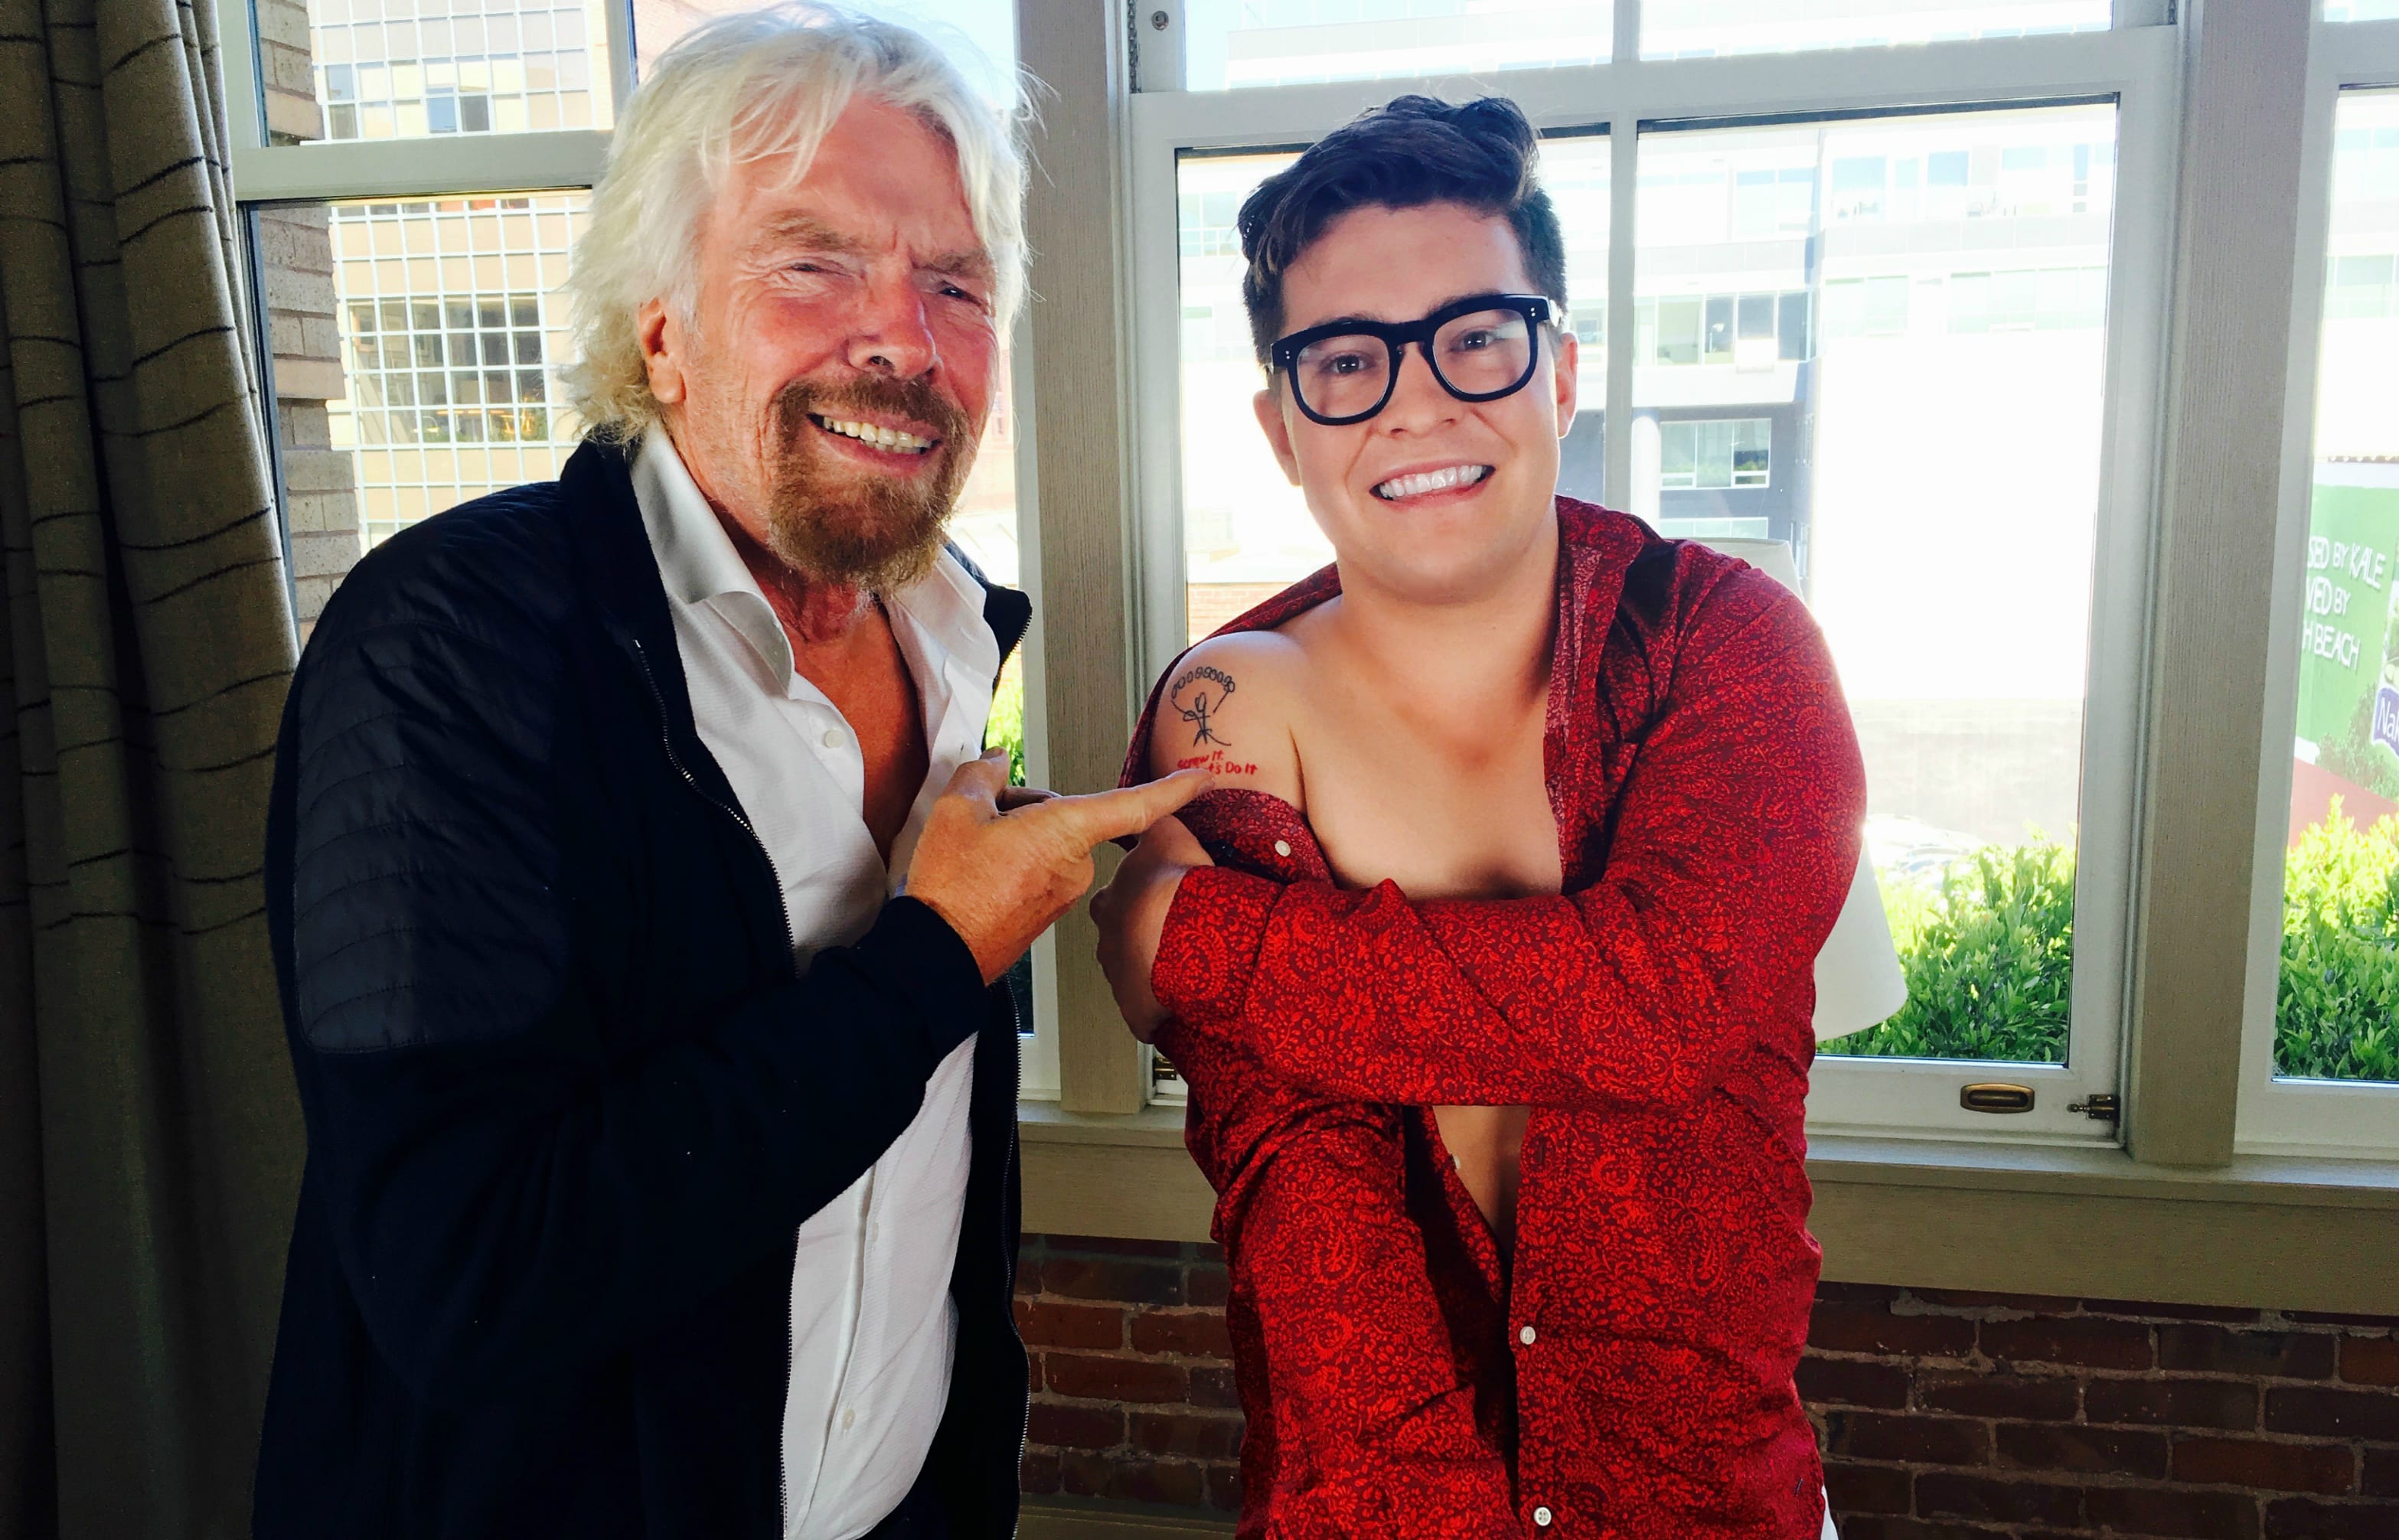 Jake Millar shows Richard Branson his tattoo. "The tattoo is a replica of a parachute my late father drew on my 10th birthday card. Underneath the parachute, it says 'Screw It, Let's Do It,' which is one of Richard's main quotes."